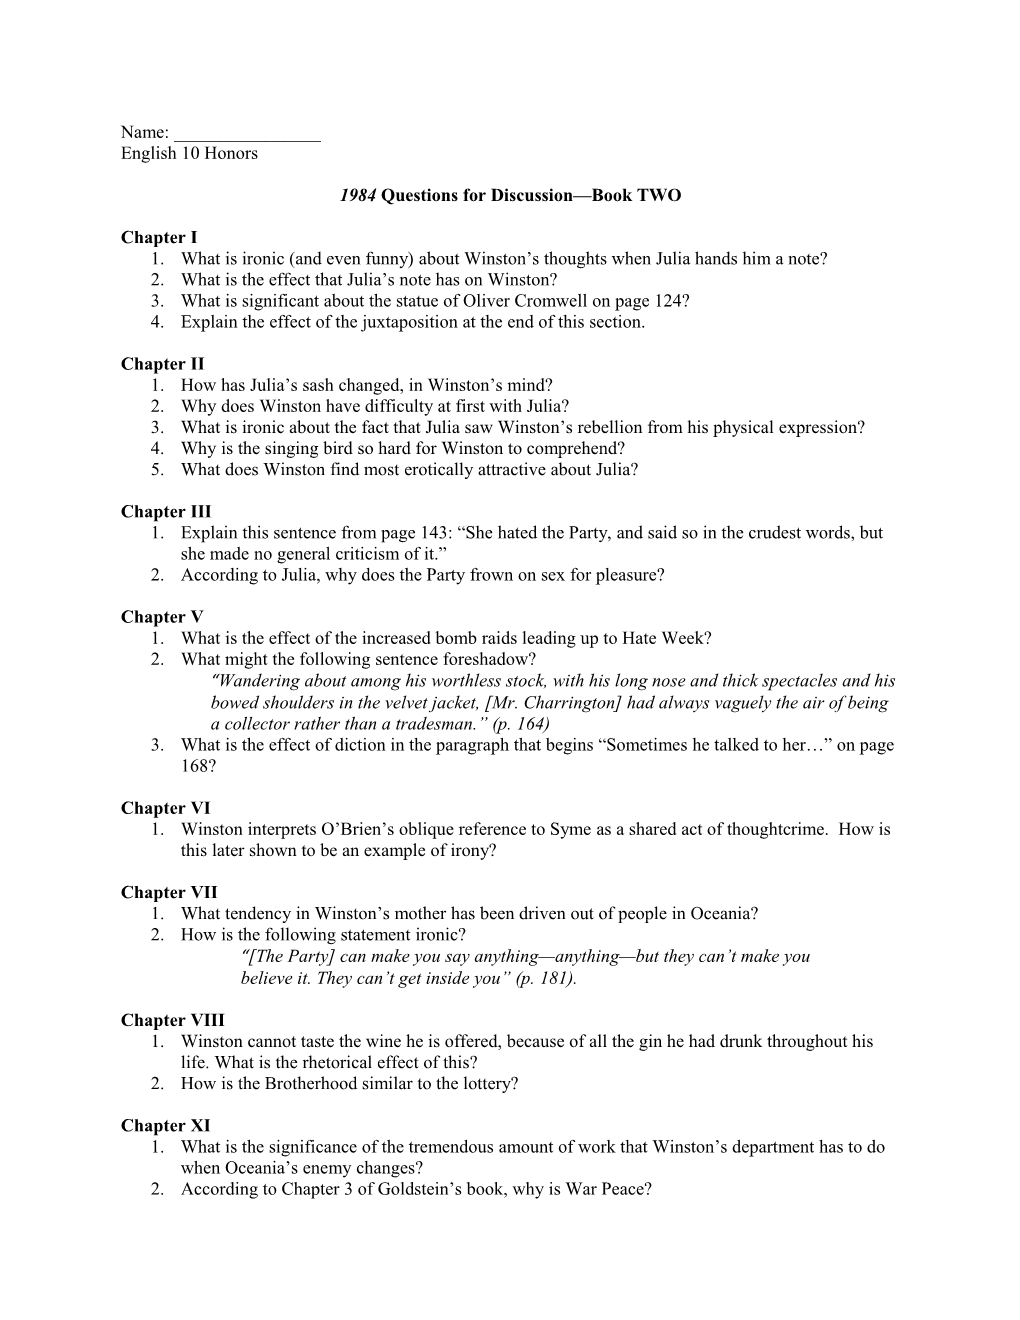 1984 Questions for Discussion Book TWO